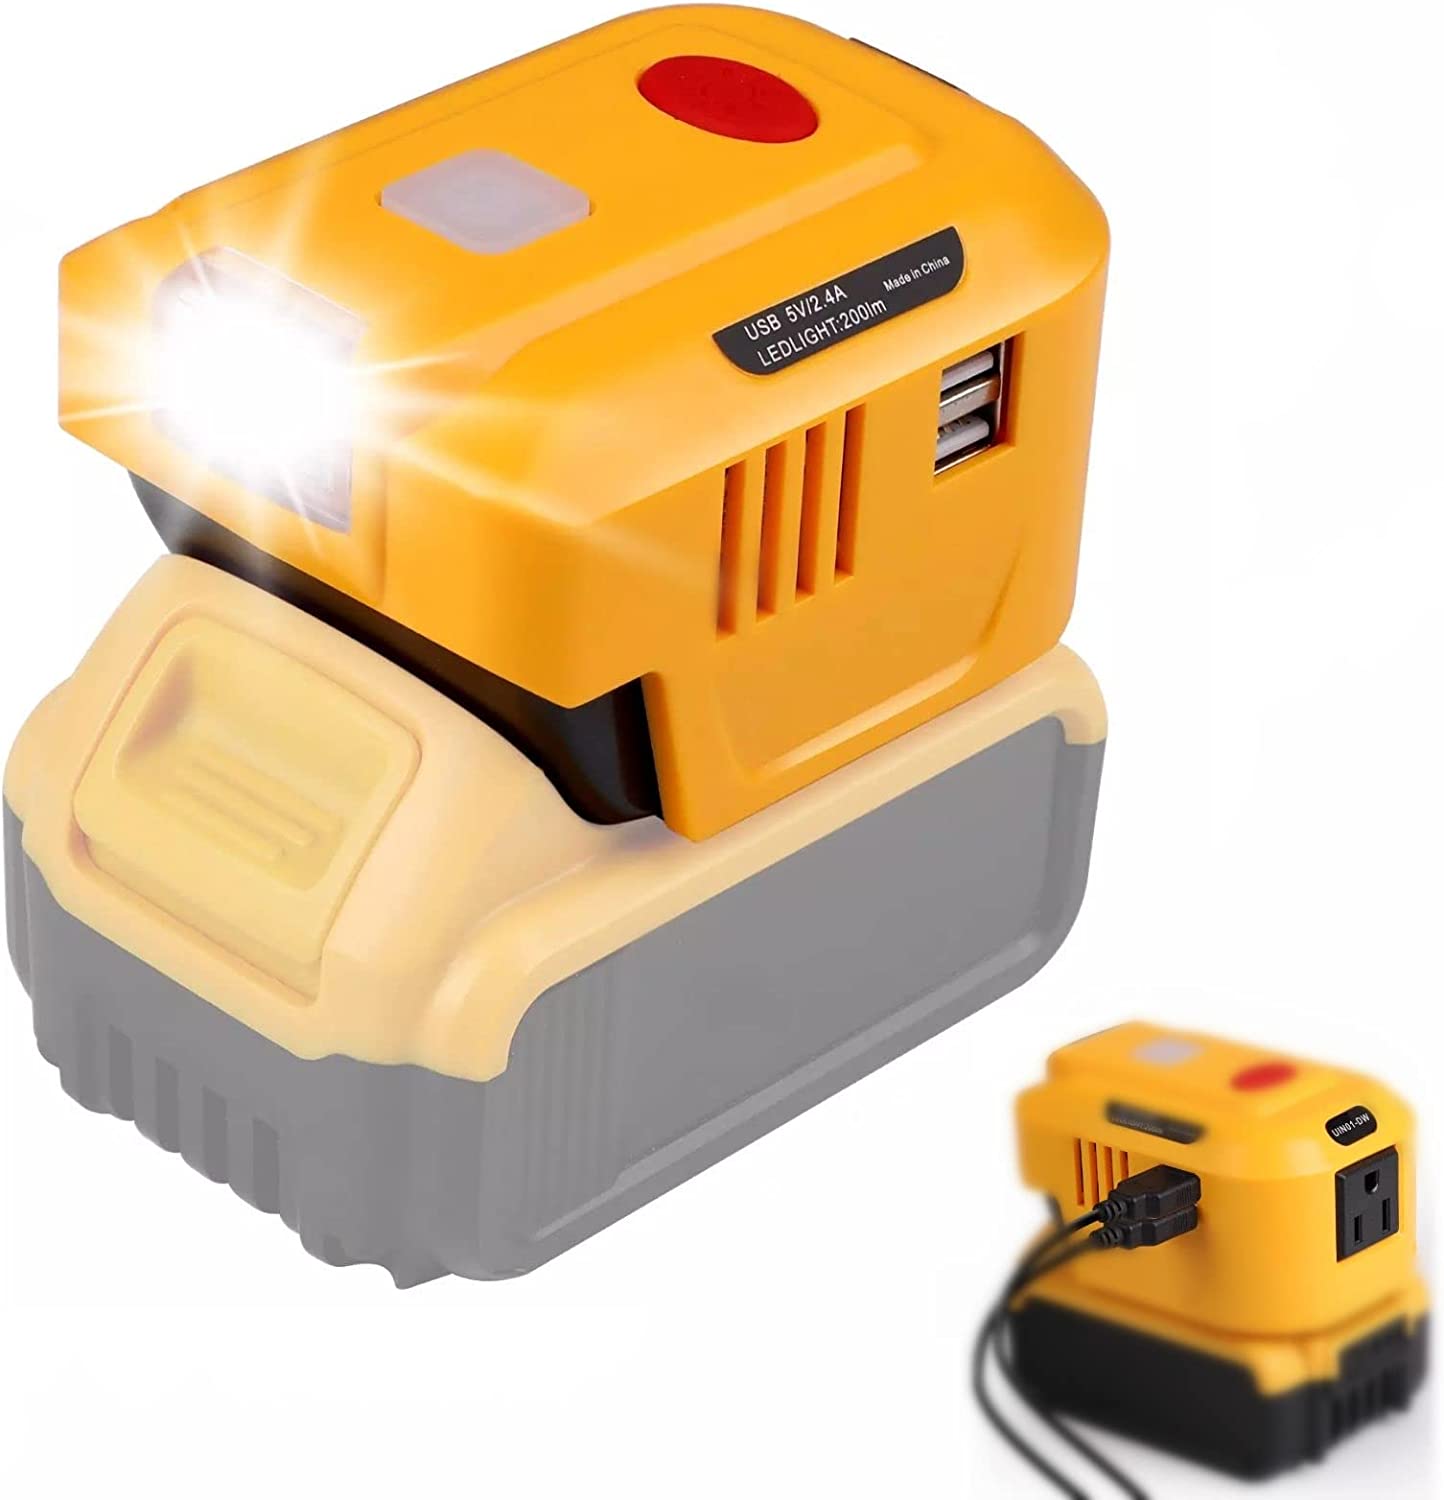 New Tool Battery Inverter with Pluggable Design Offers Versatile Functionality